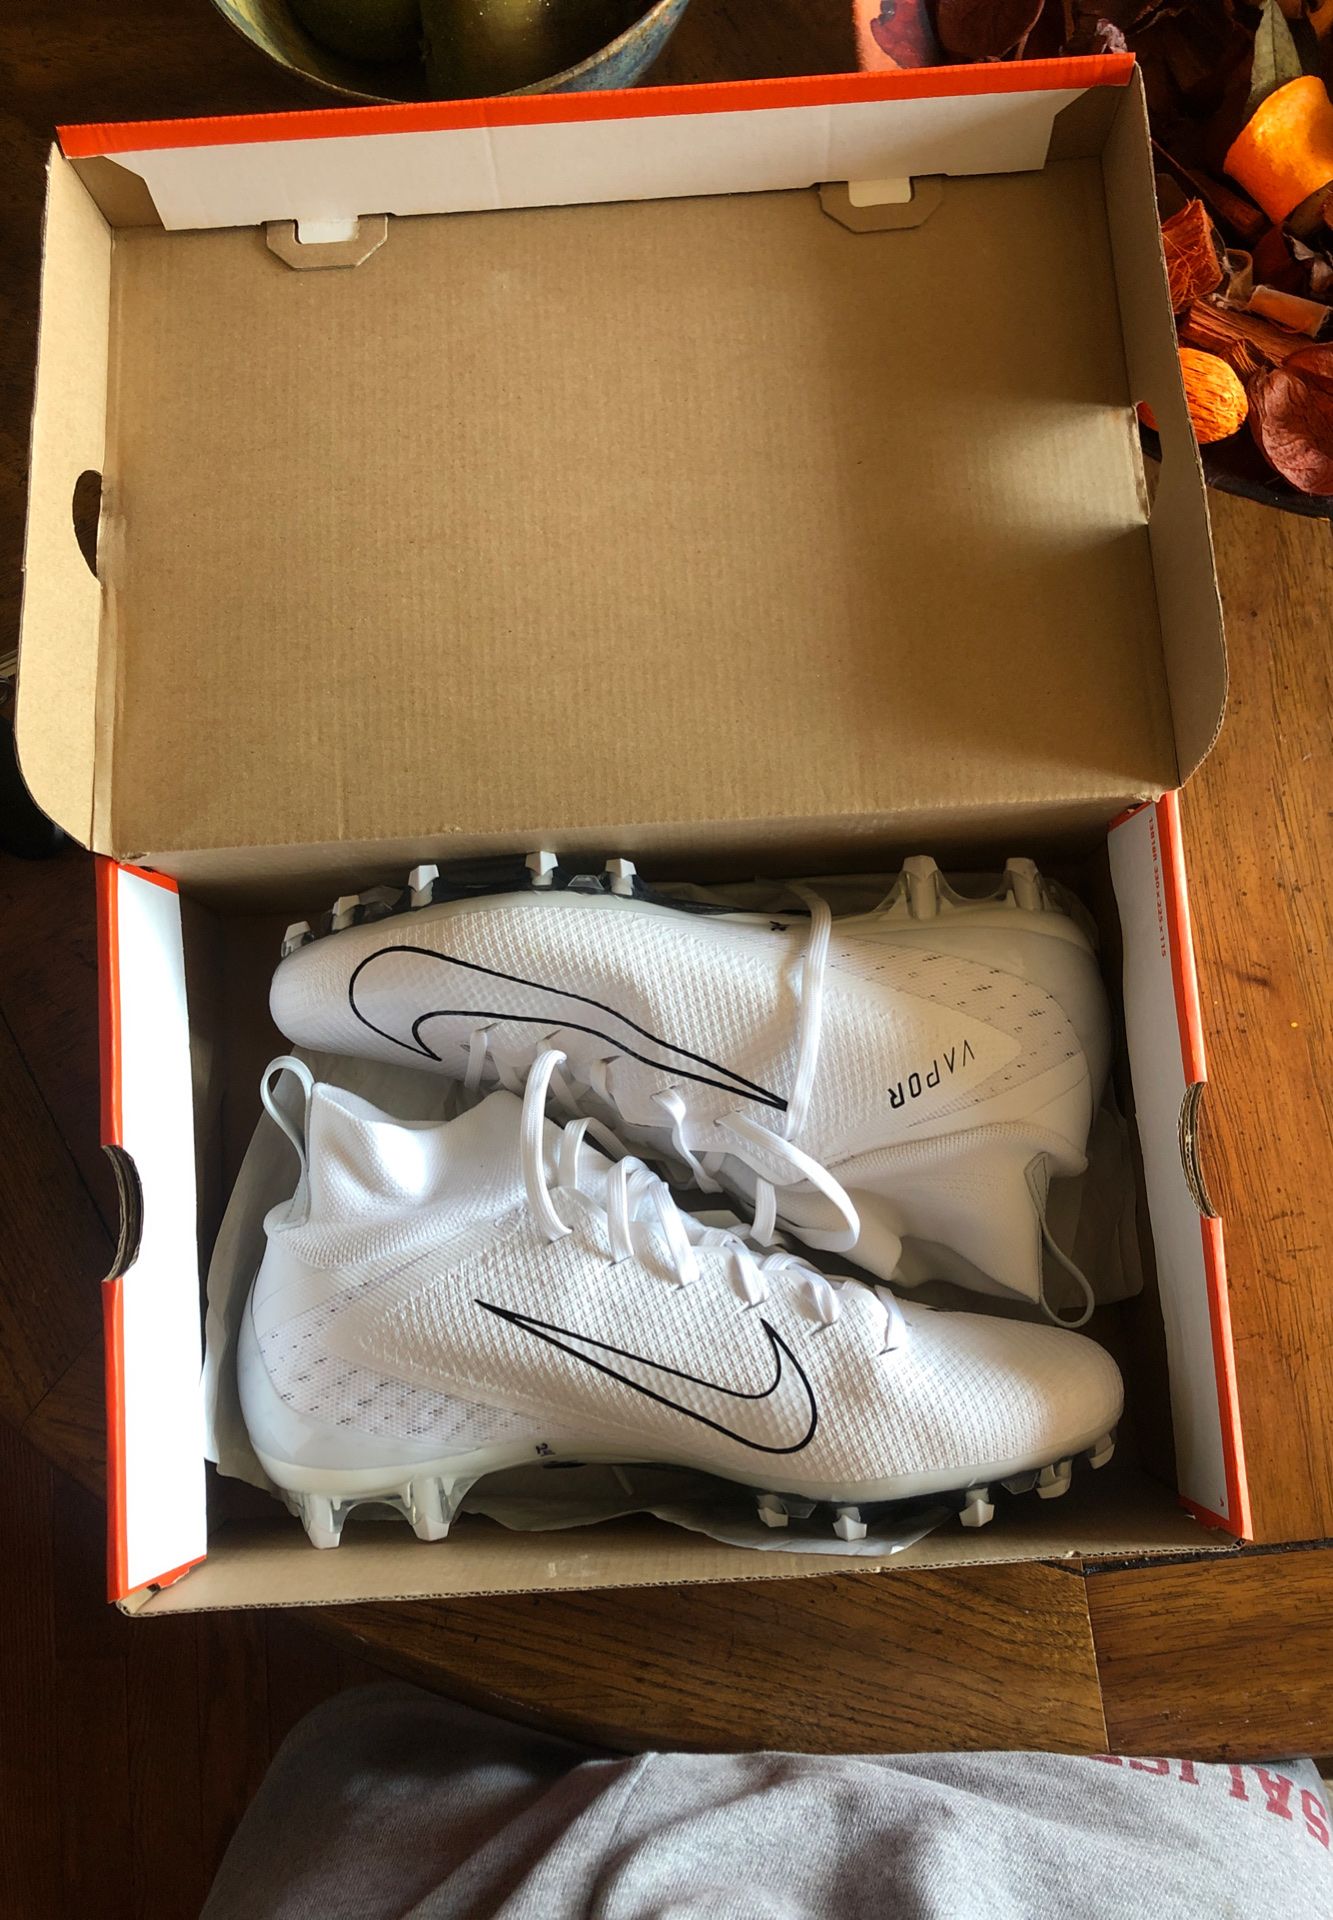 10.5 Nike cleats never worn (brand new)